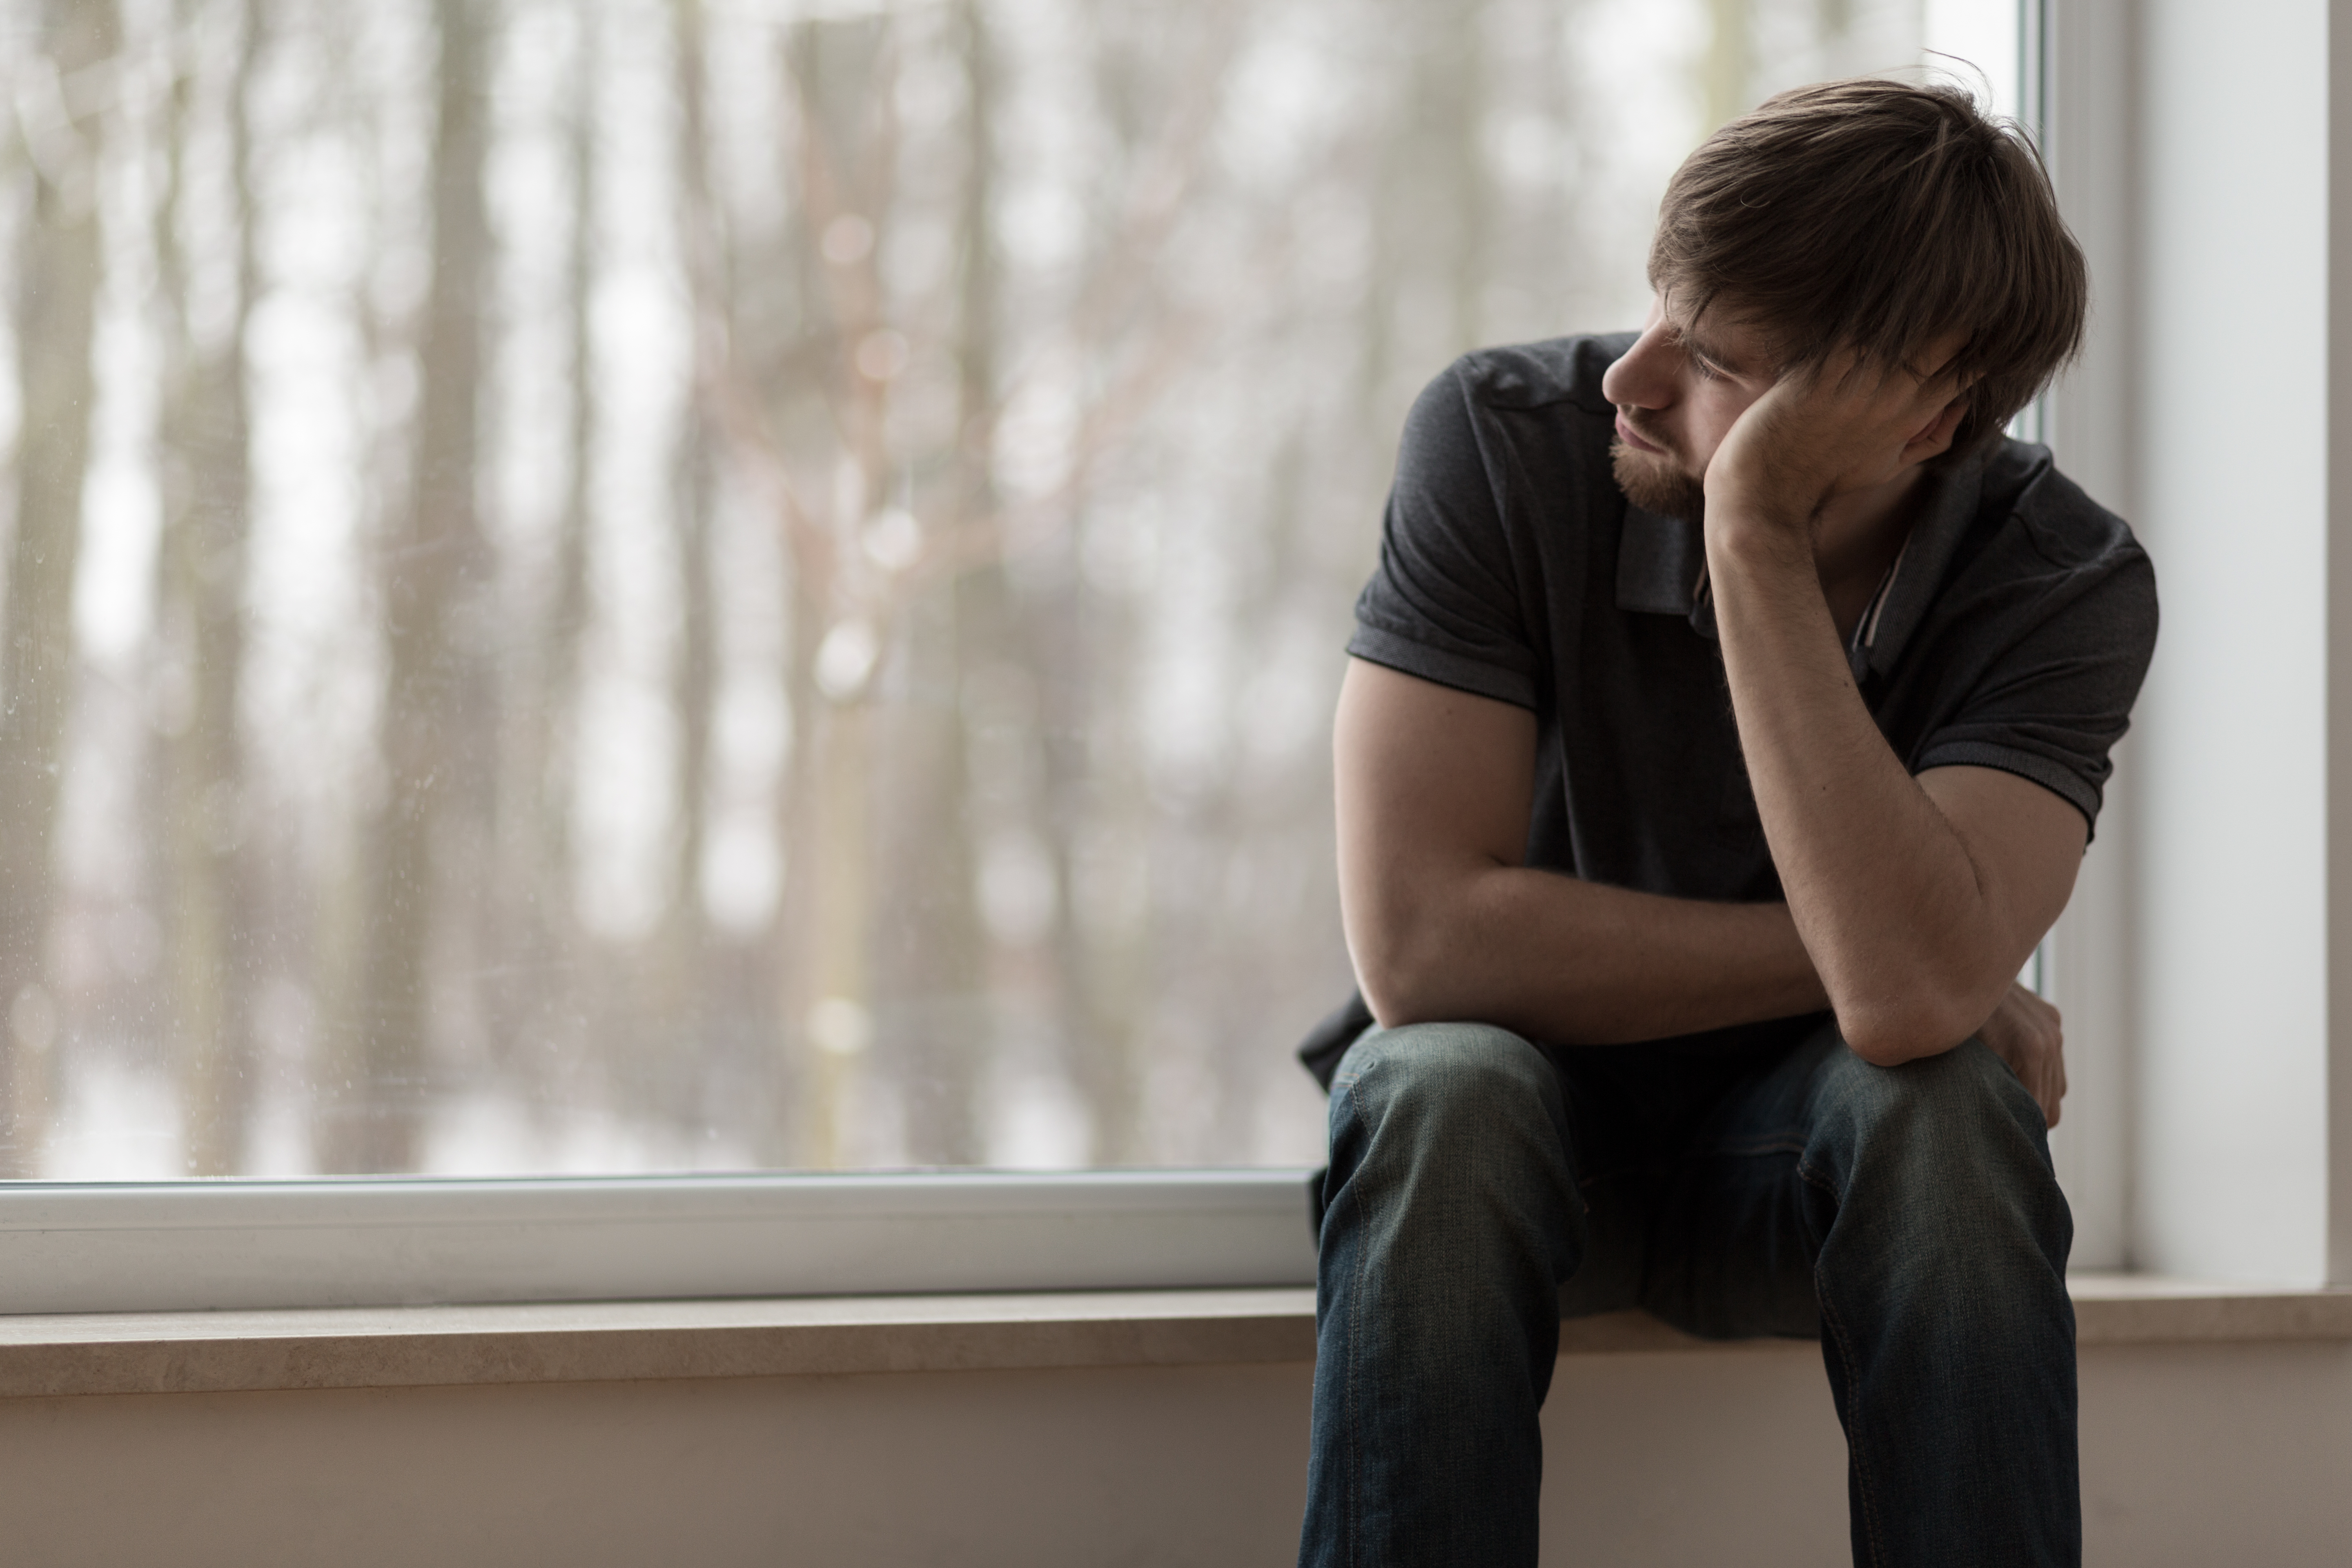 Young miserable depressed man | Source: Shutterstock